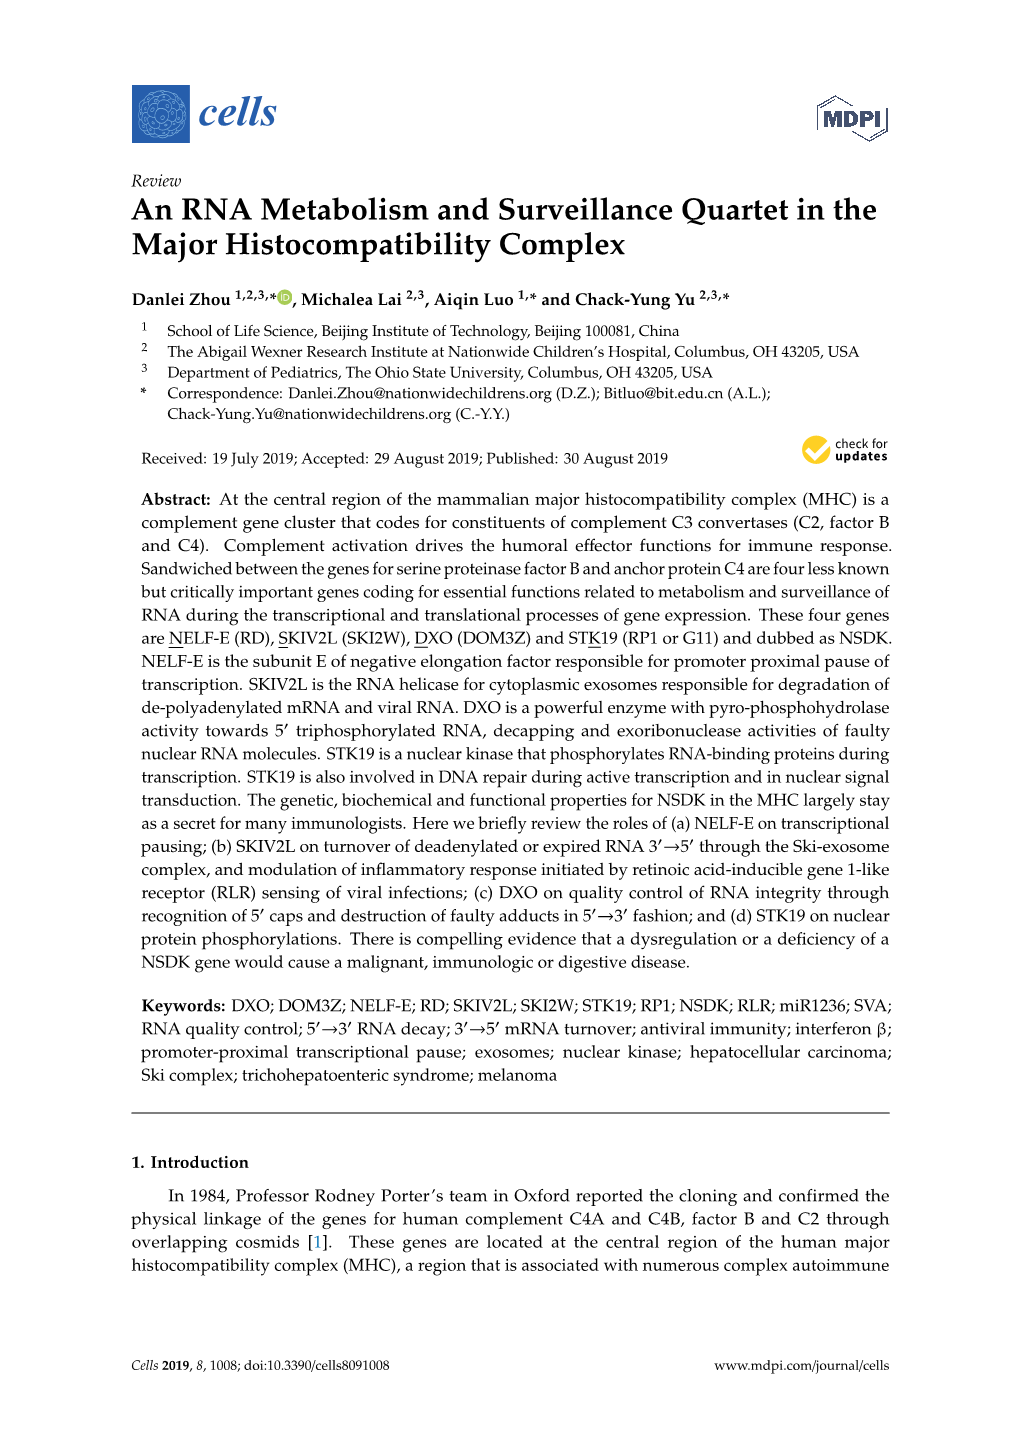 An RNA Metabolism and Surveillance Quartet in the Major Histocompatibility Complex